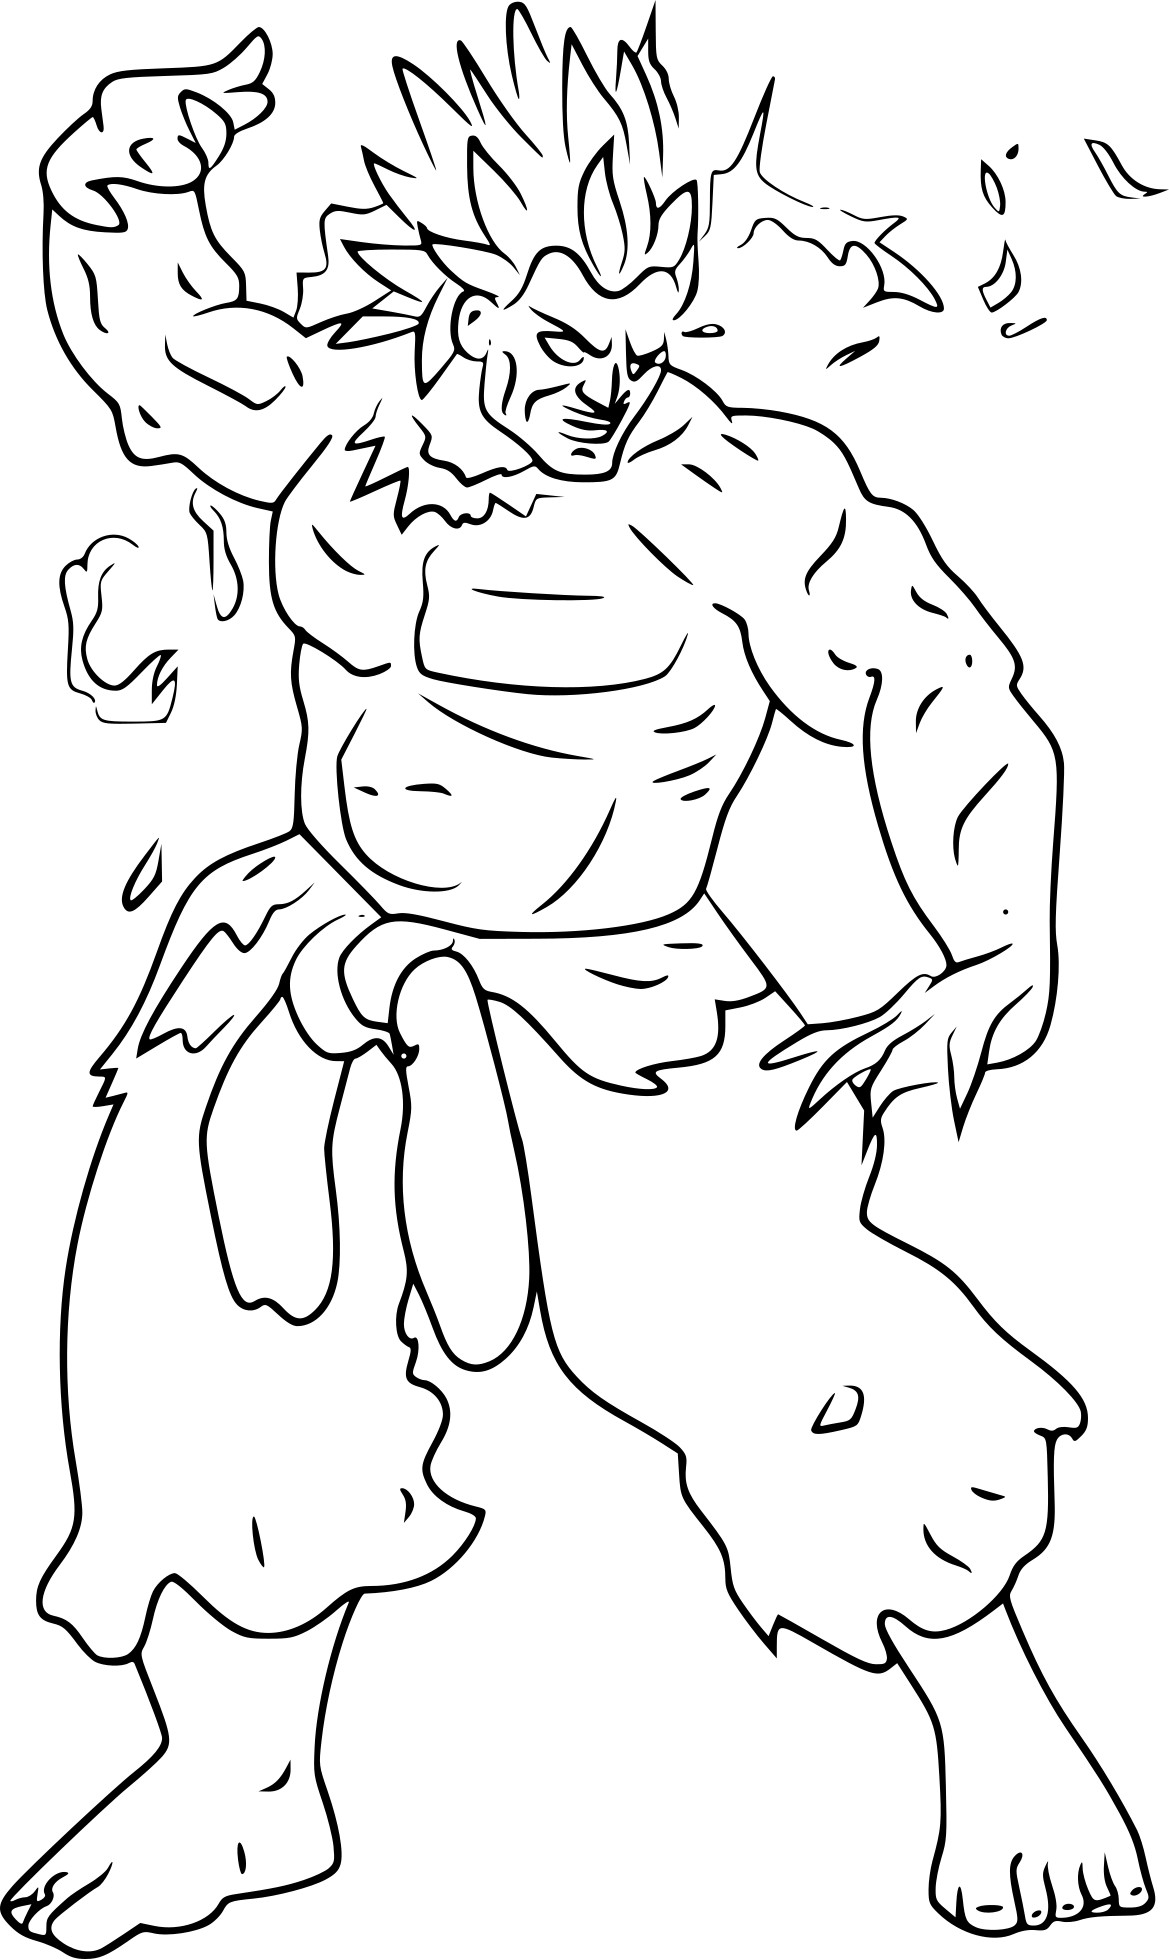 Street Fighter Oni coloring page